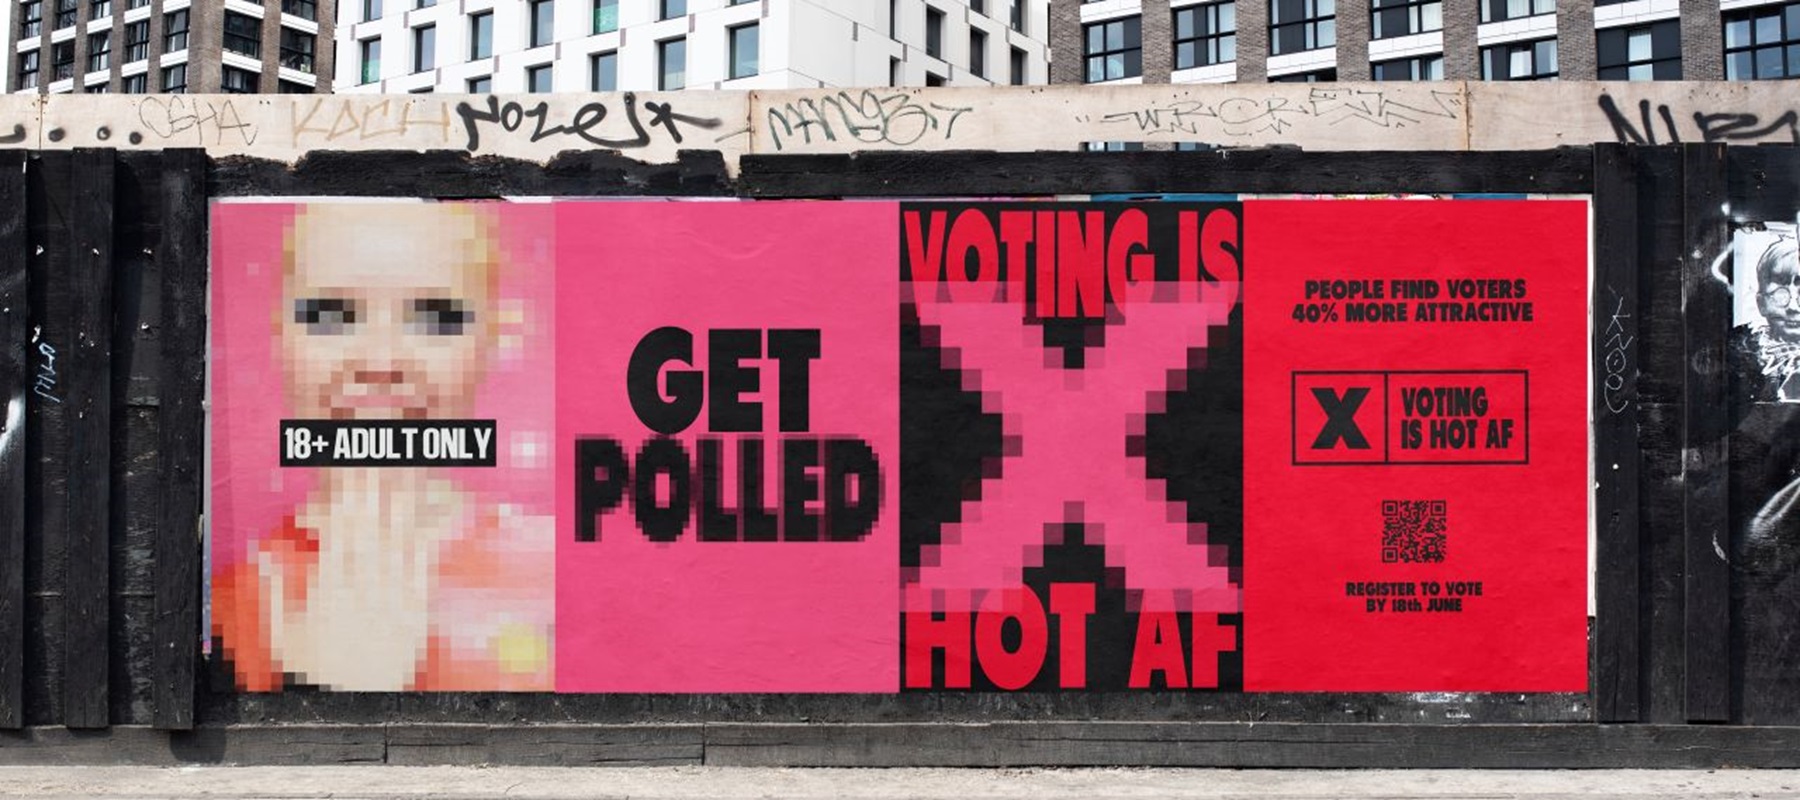 Saatchi & Saatchi debut new campaign to drive young voters to the polls